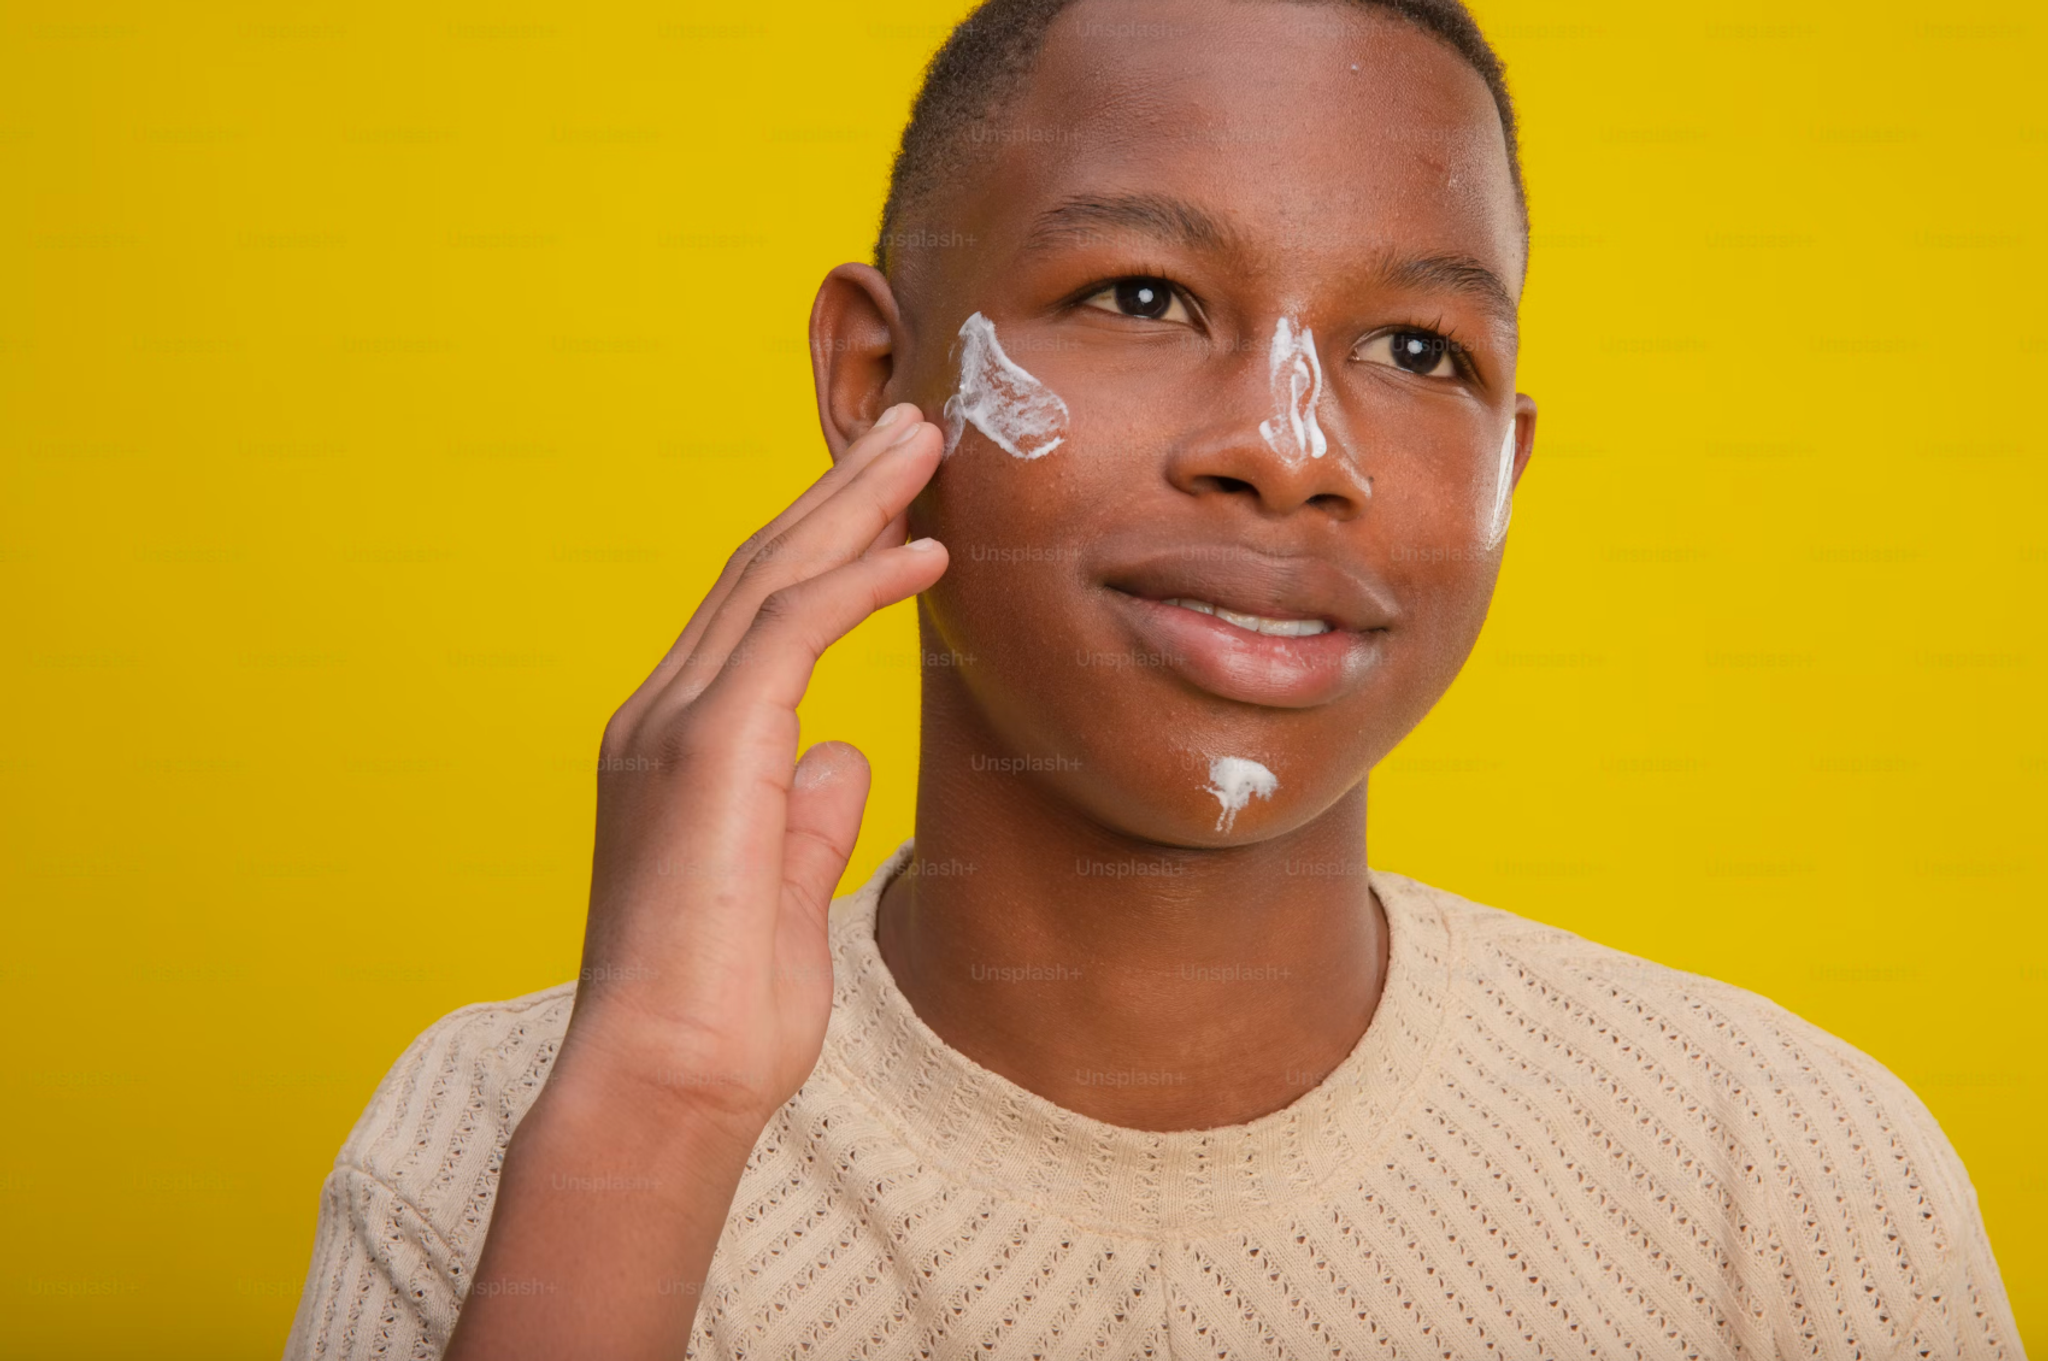 Teen boys are making investments into beauty regimes 